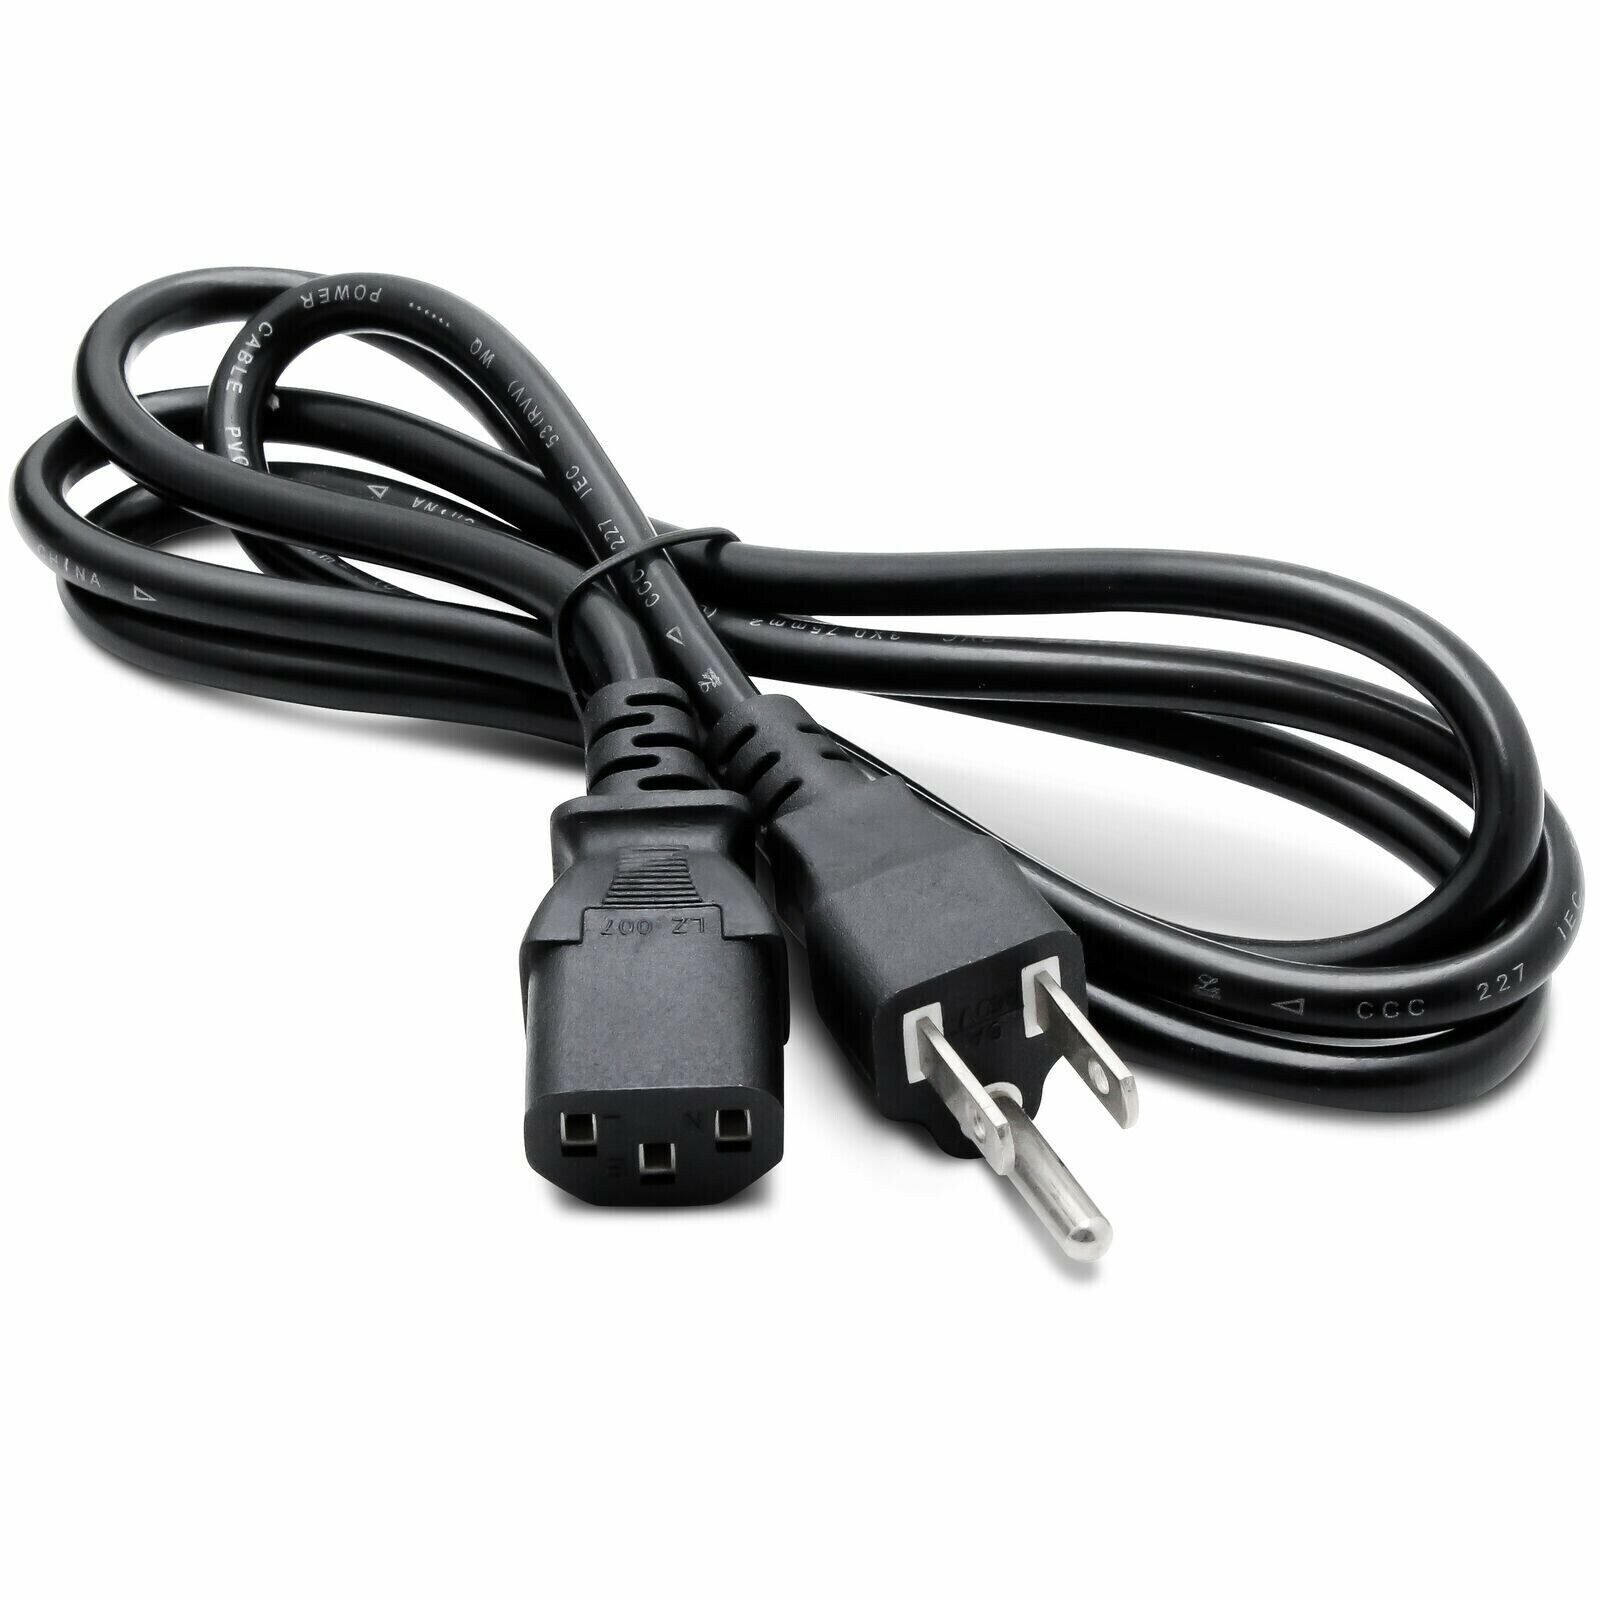 5ft ETL AC Power Cord Cable Lead For Farberware Coffee FCP240 FCP240A Percolator